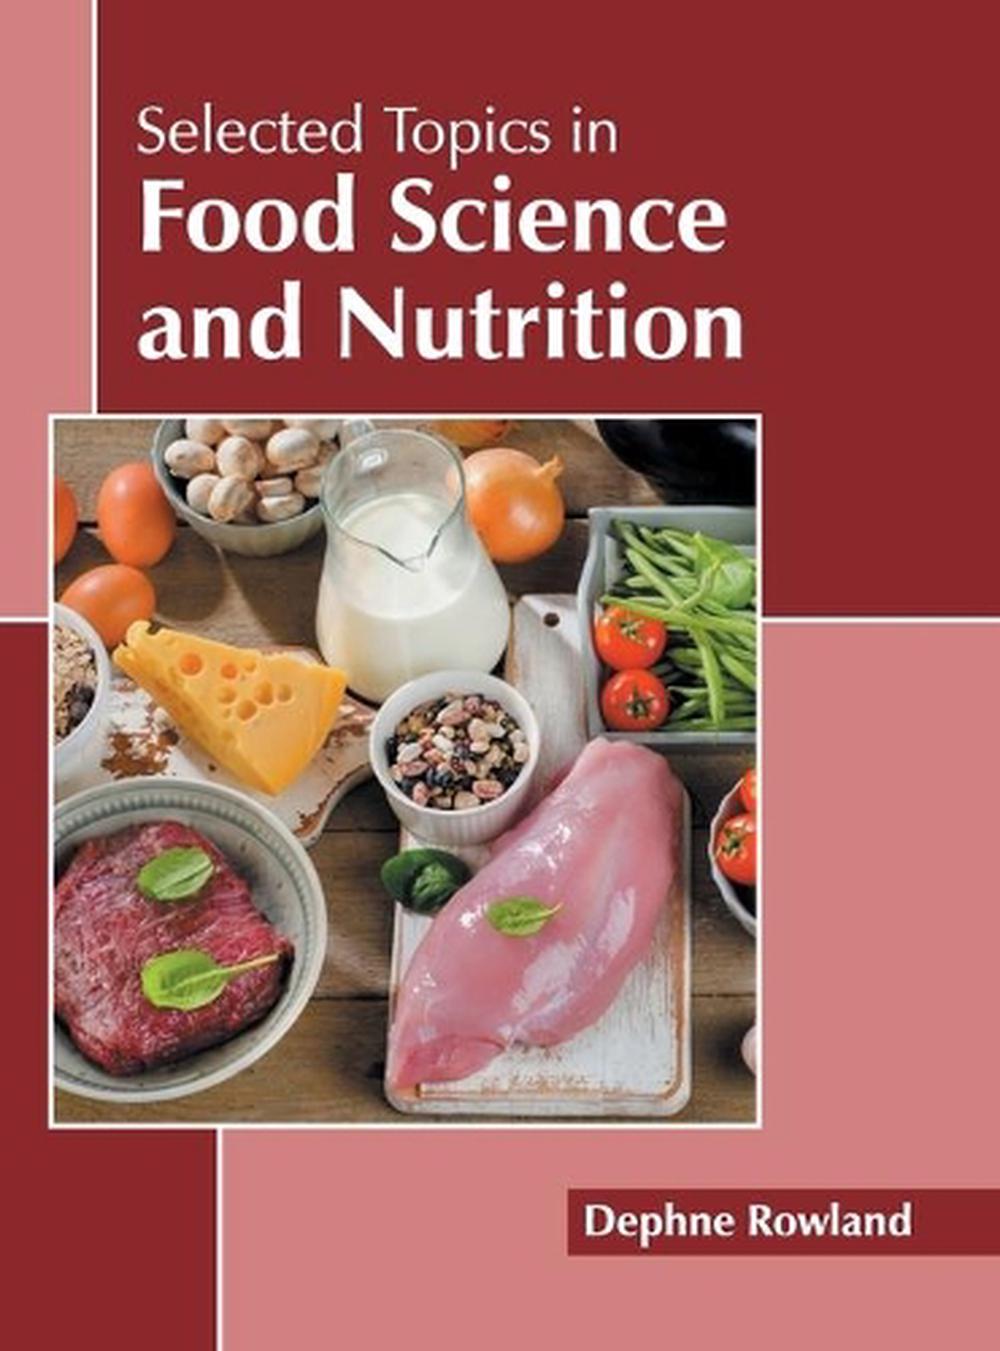 master thesis food science